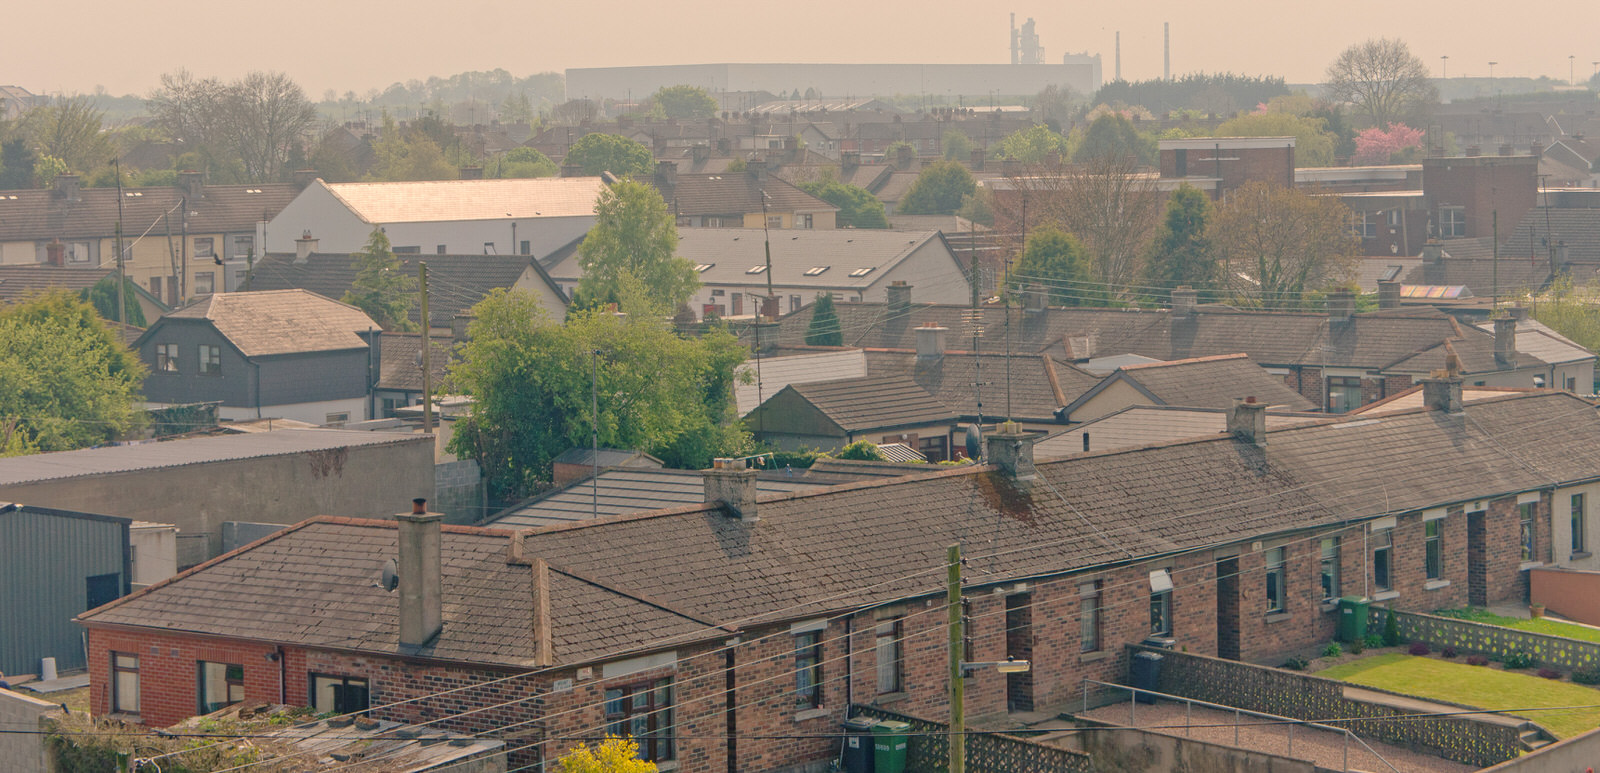 PANORAMIC VIEWS OF DROGHEDA AS IT WAS WAS IN 2011 [PRODUCED USING SONY NEX-5 PANORAMA MODE] 009